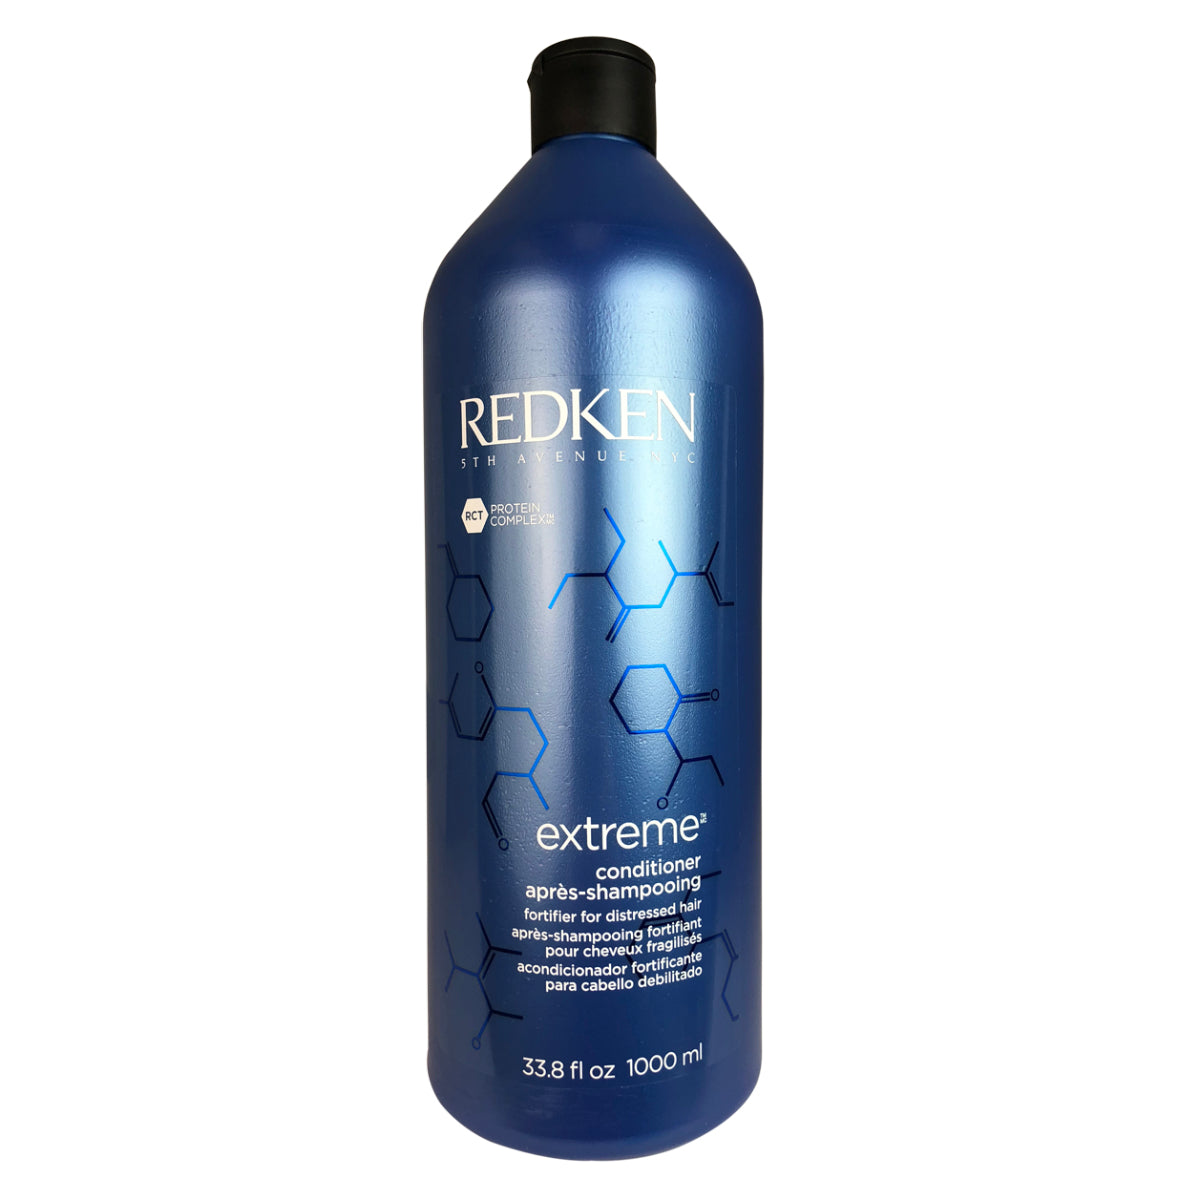 Redken Extreme Conditioner Fortifier for Distressed Hair 33.8 oz.